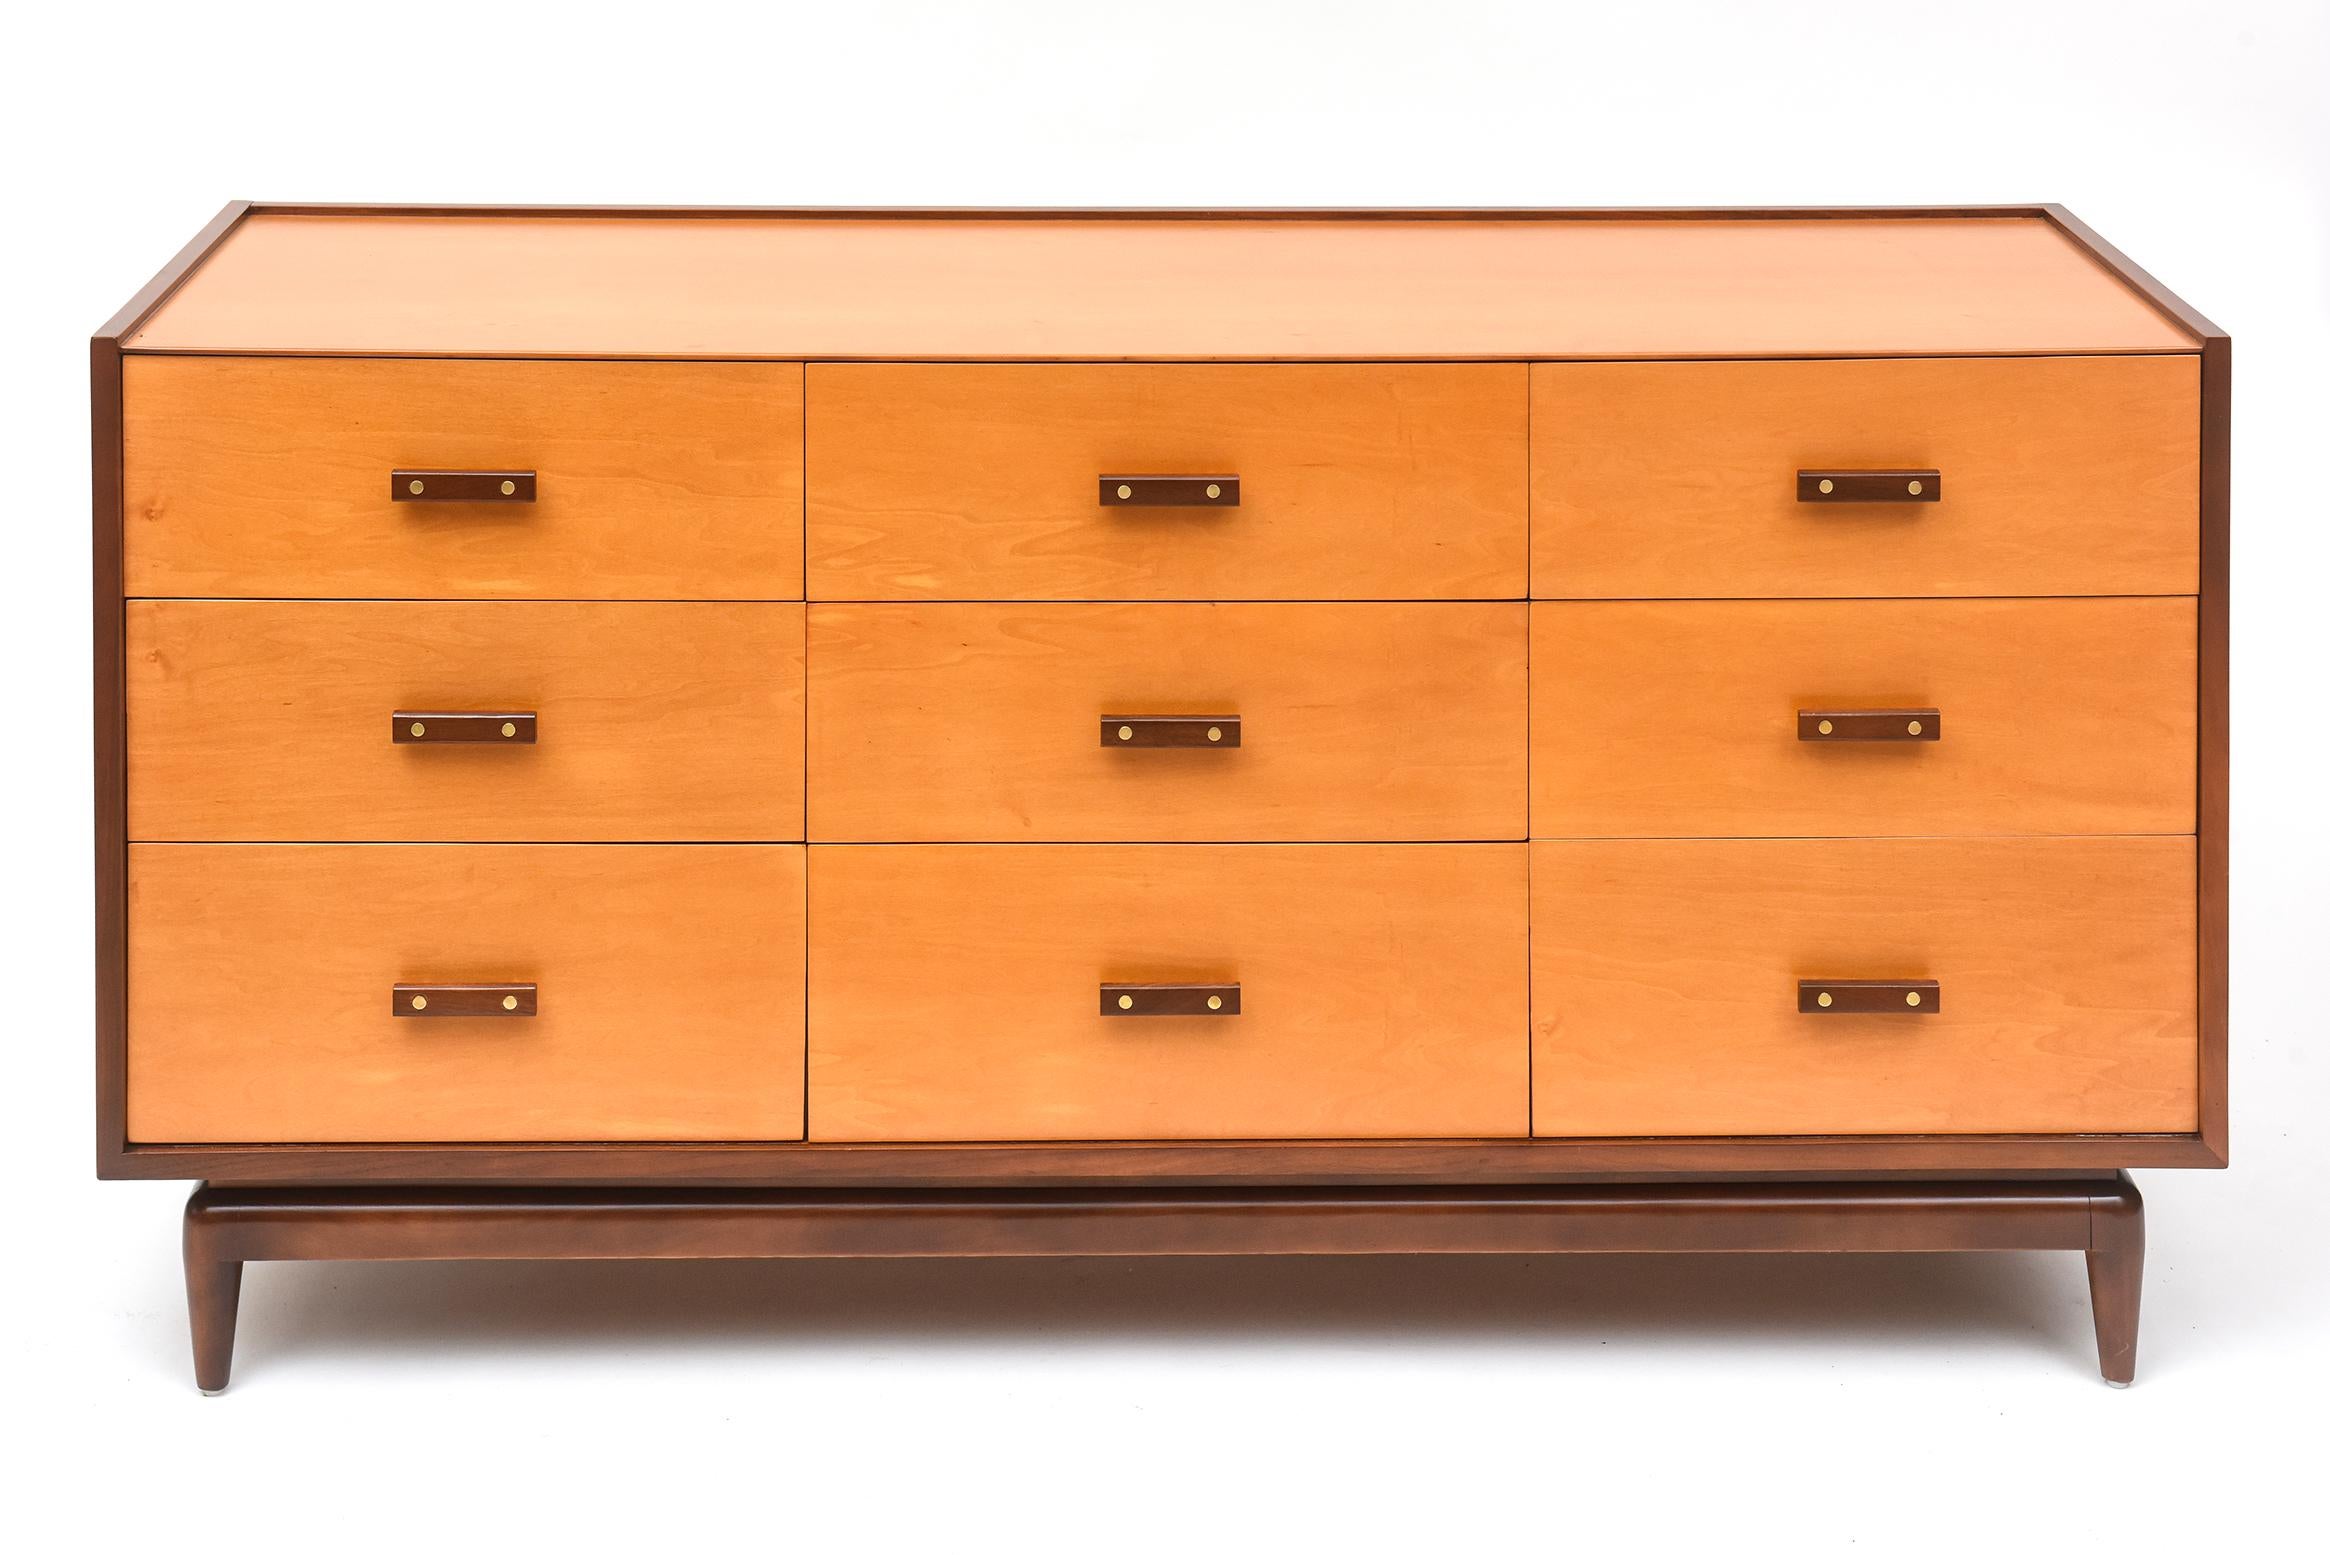 This 1960s Italian dresser charms with its eye-catching combination of light maple, rich walnut trim, and warm polished brass details. Fully restored - inside and out!